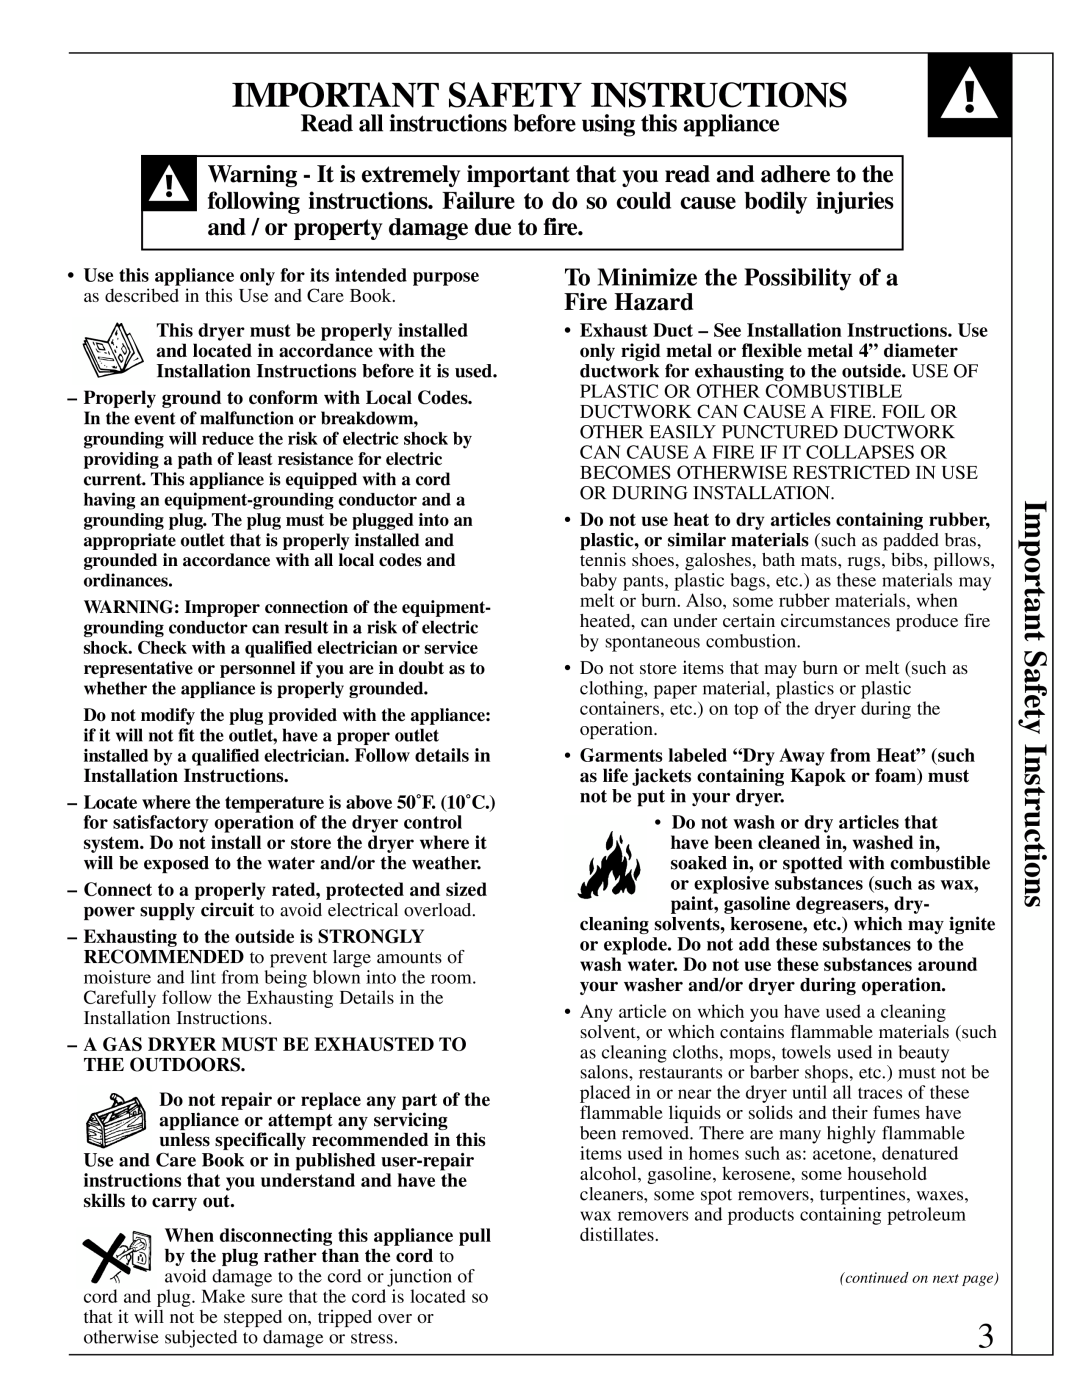 GE 500A280P013 operating instructions Important Safety Instructions, Read all instructions before using this appliance 